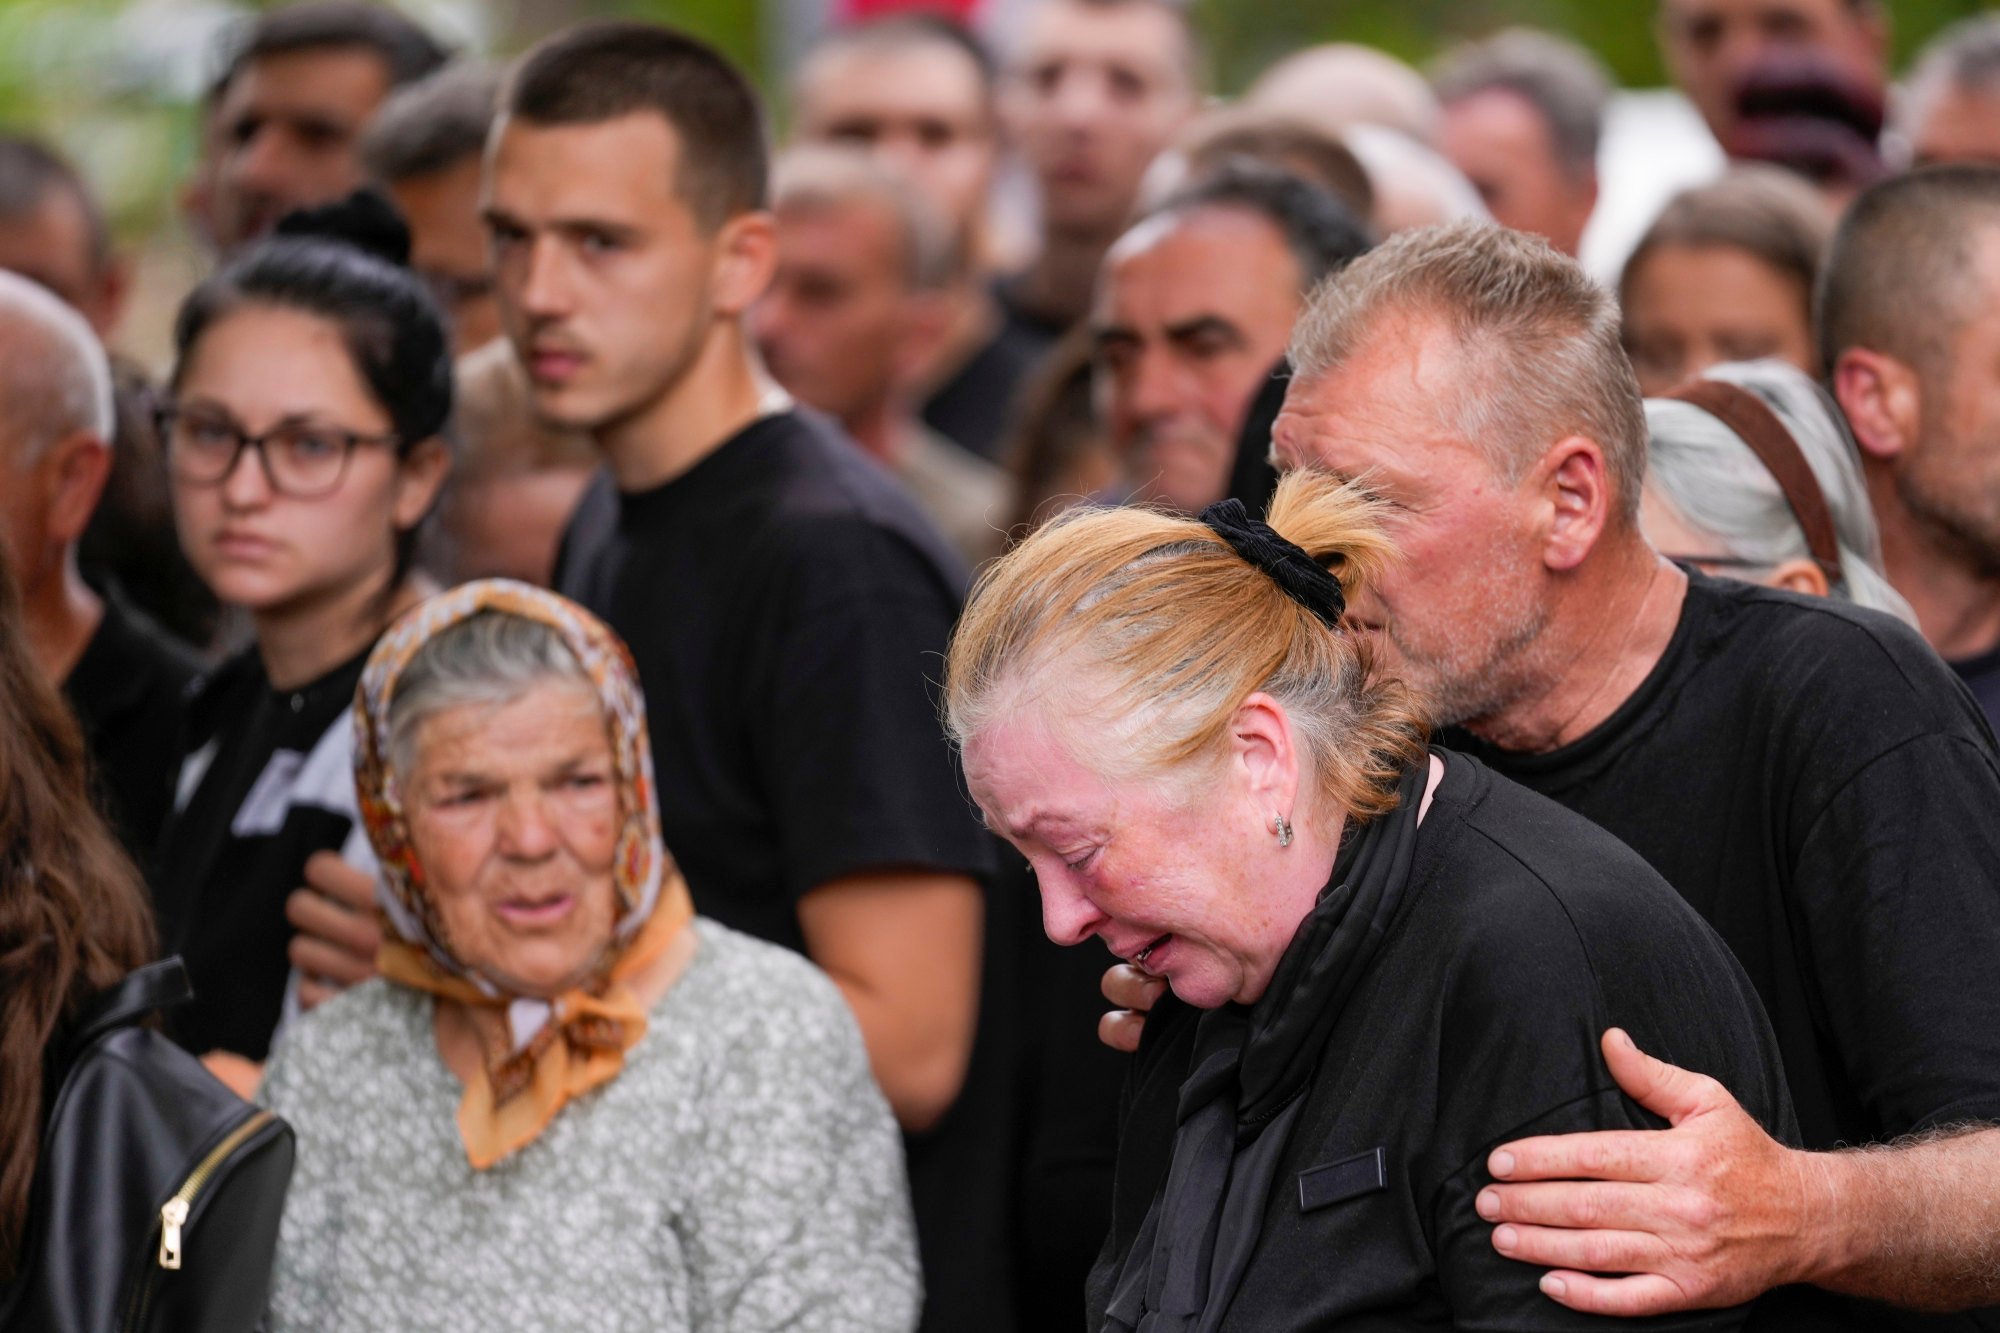 Burials set in Serbia for some of victims of mass shootings